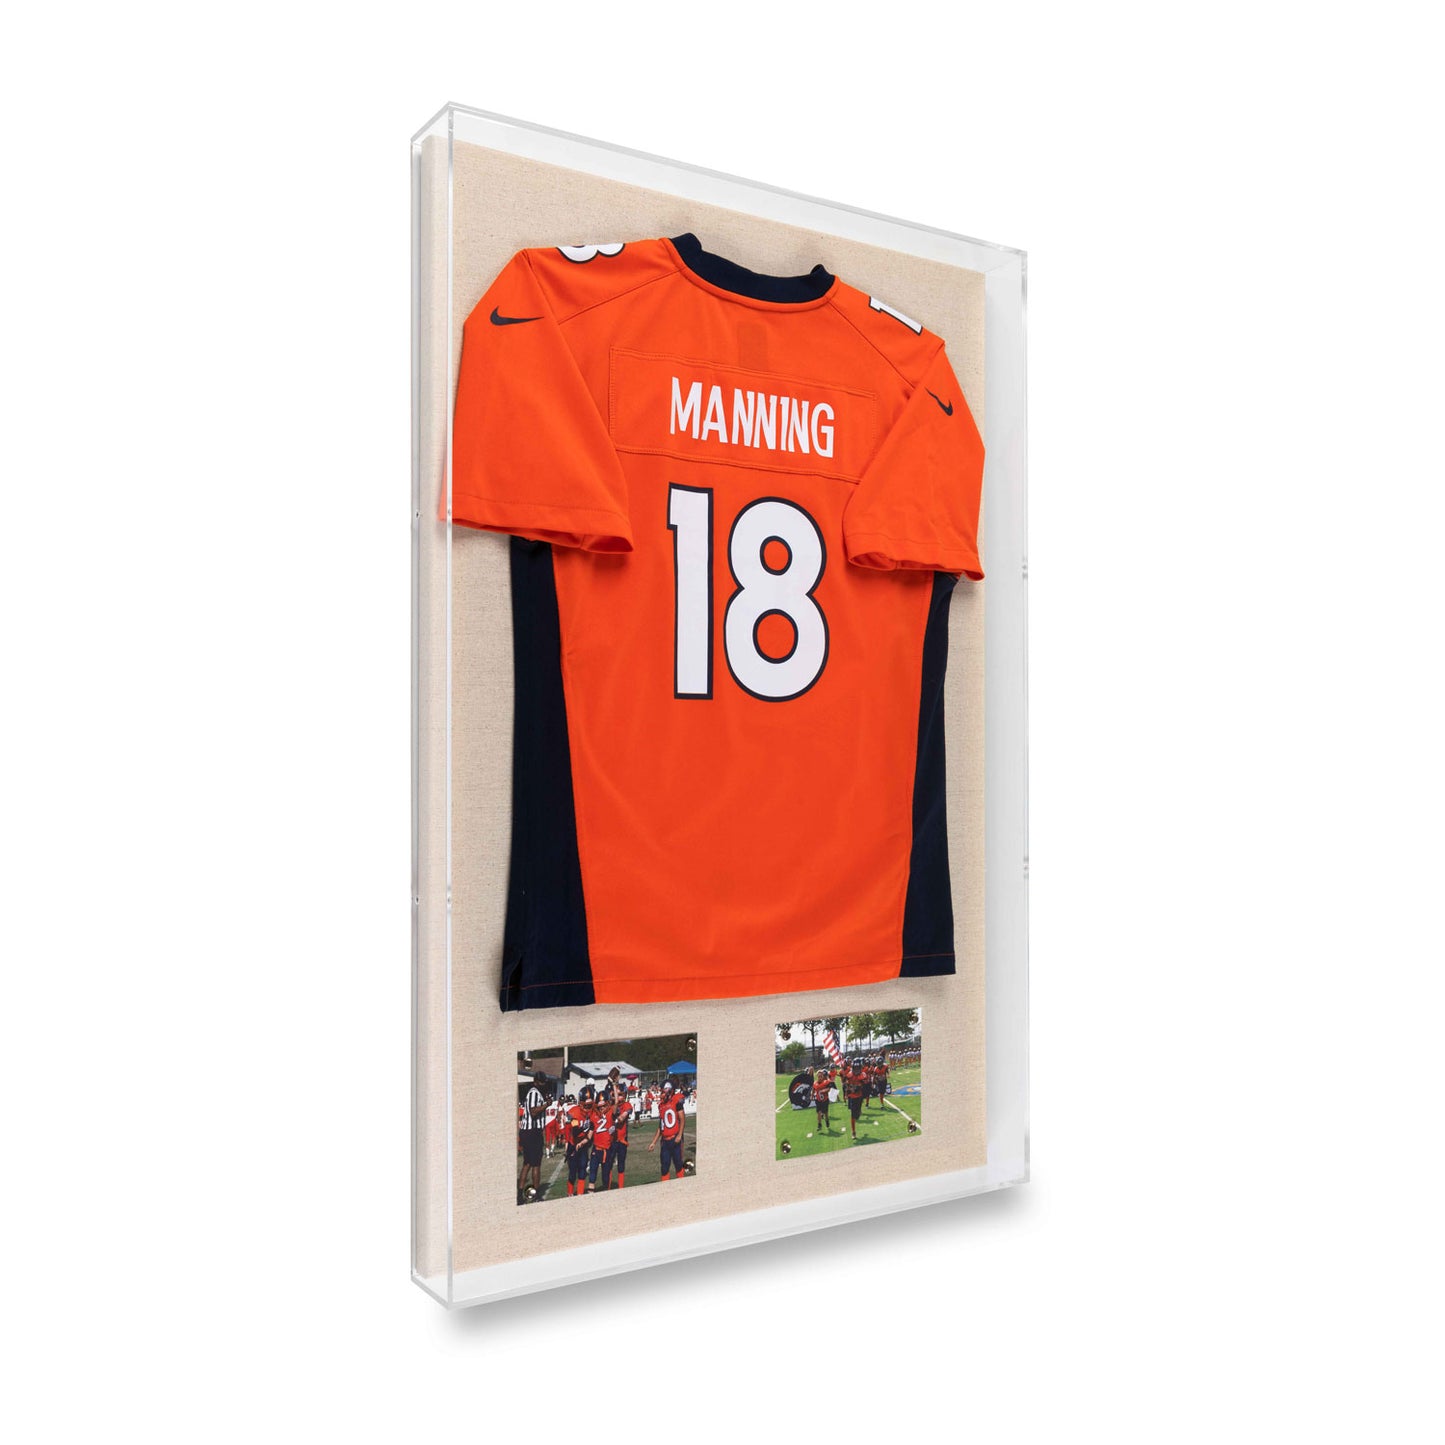 Jersey Shadowbox Display for Athletes & Sports Fans